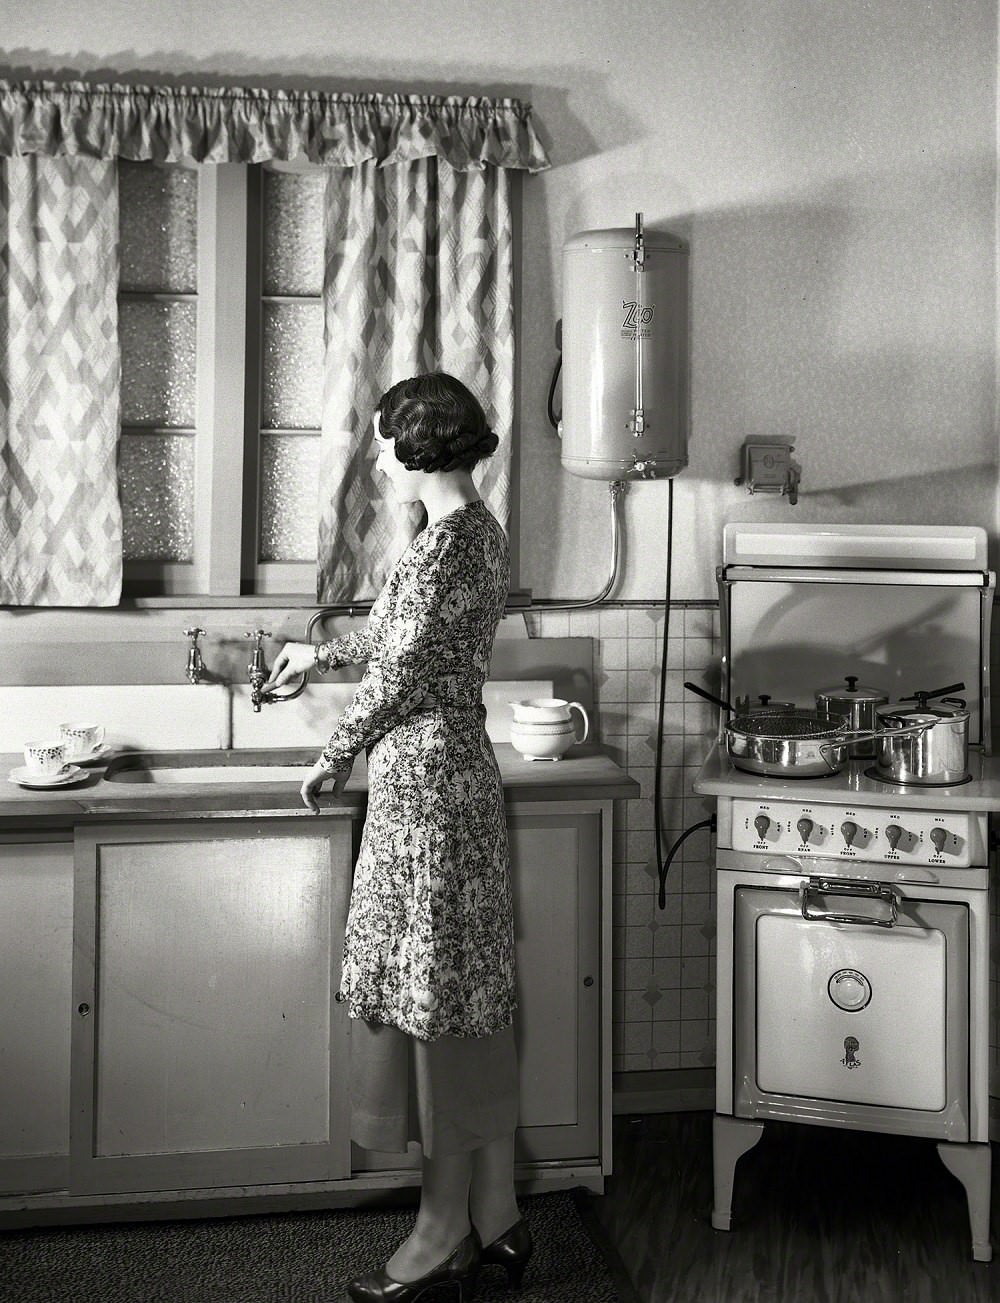 Model at sink in kitchen equipped with Atlas electric stove and Zip water heater, Wellington, New Zealand circa 1930s